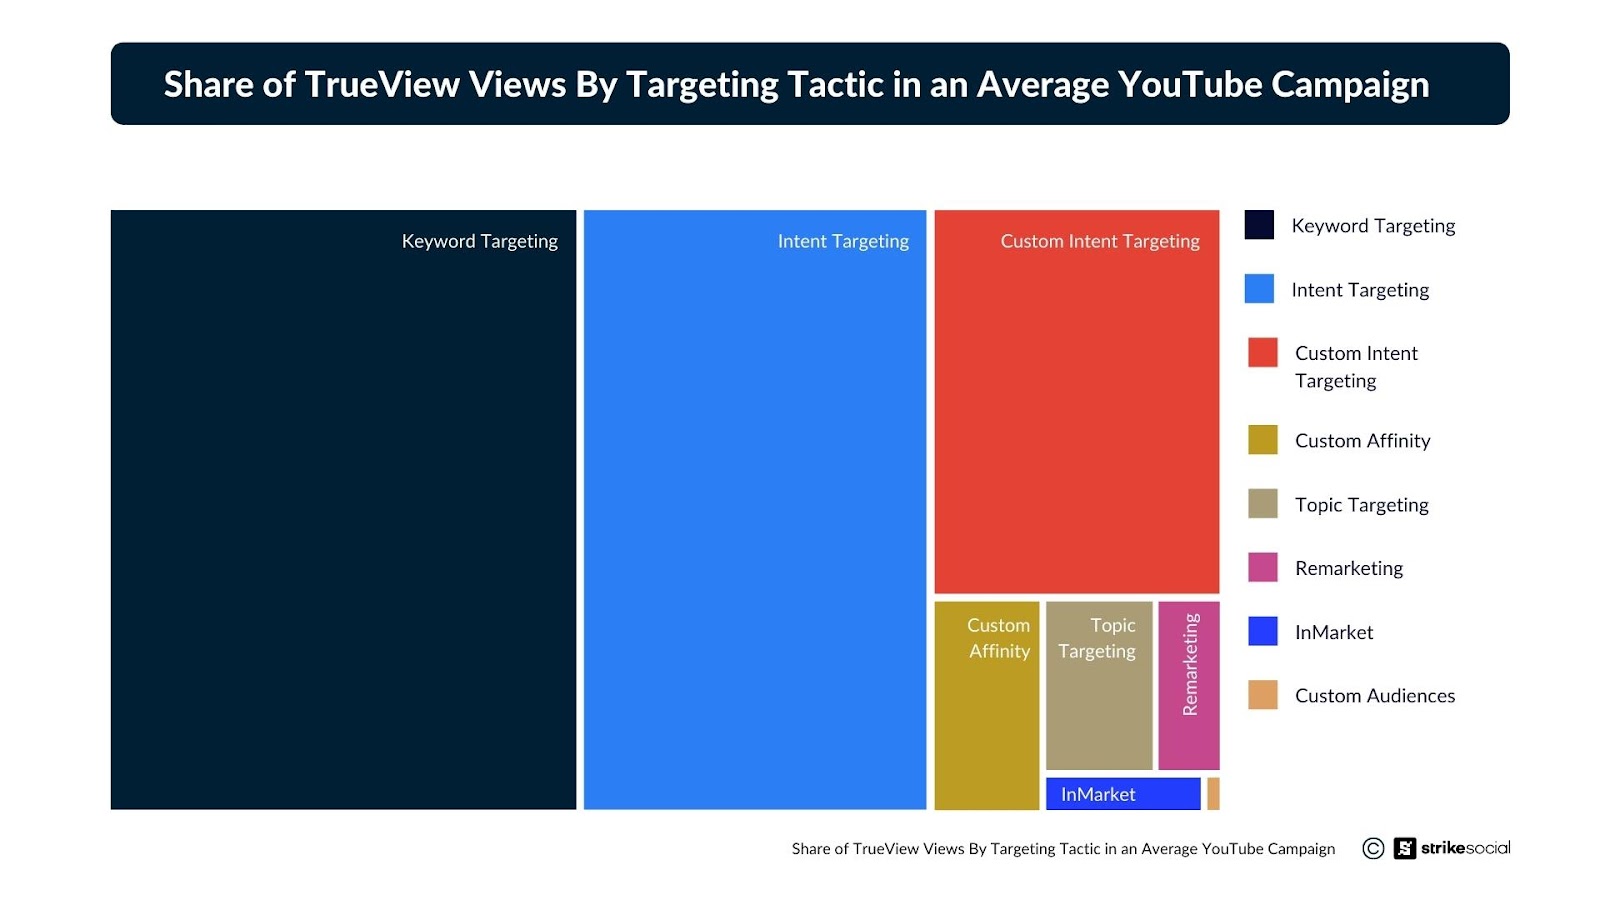 Share of TrueView Views by targeting tactic in an Average YouTube Campaign